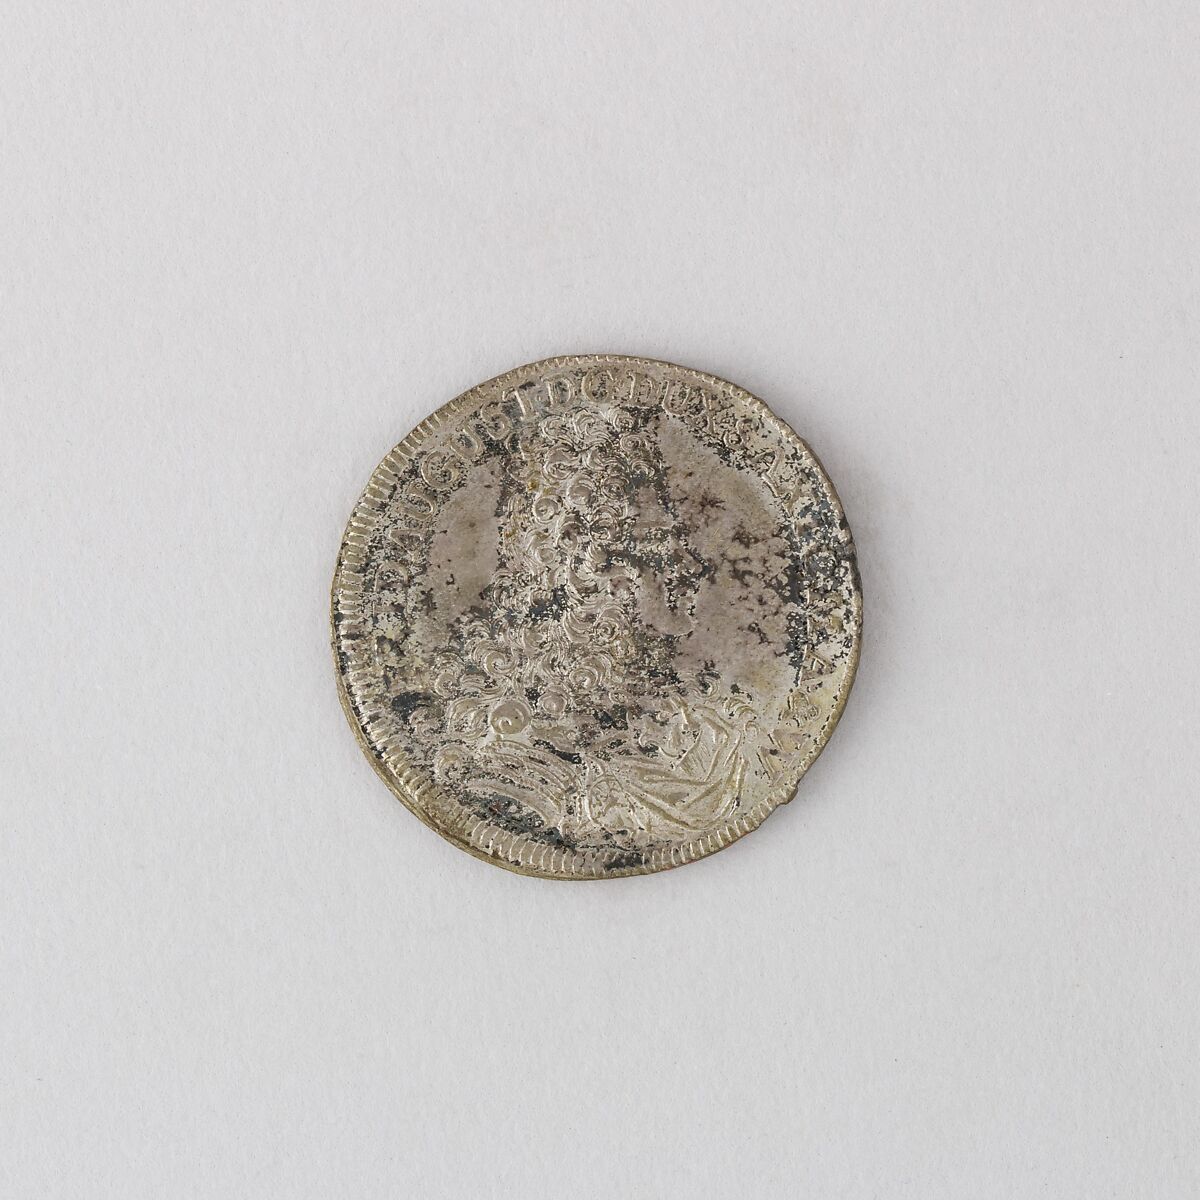 Coin (Two-Thirds Thaler) Showing Frederick Augustus I, Duke and Elector of Saxony, Silver, German 